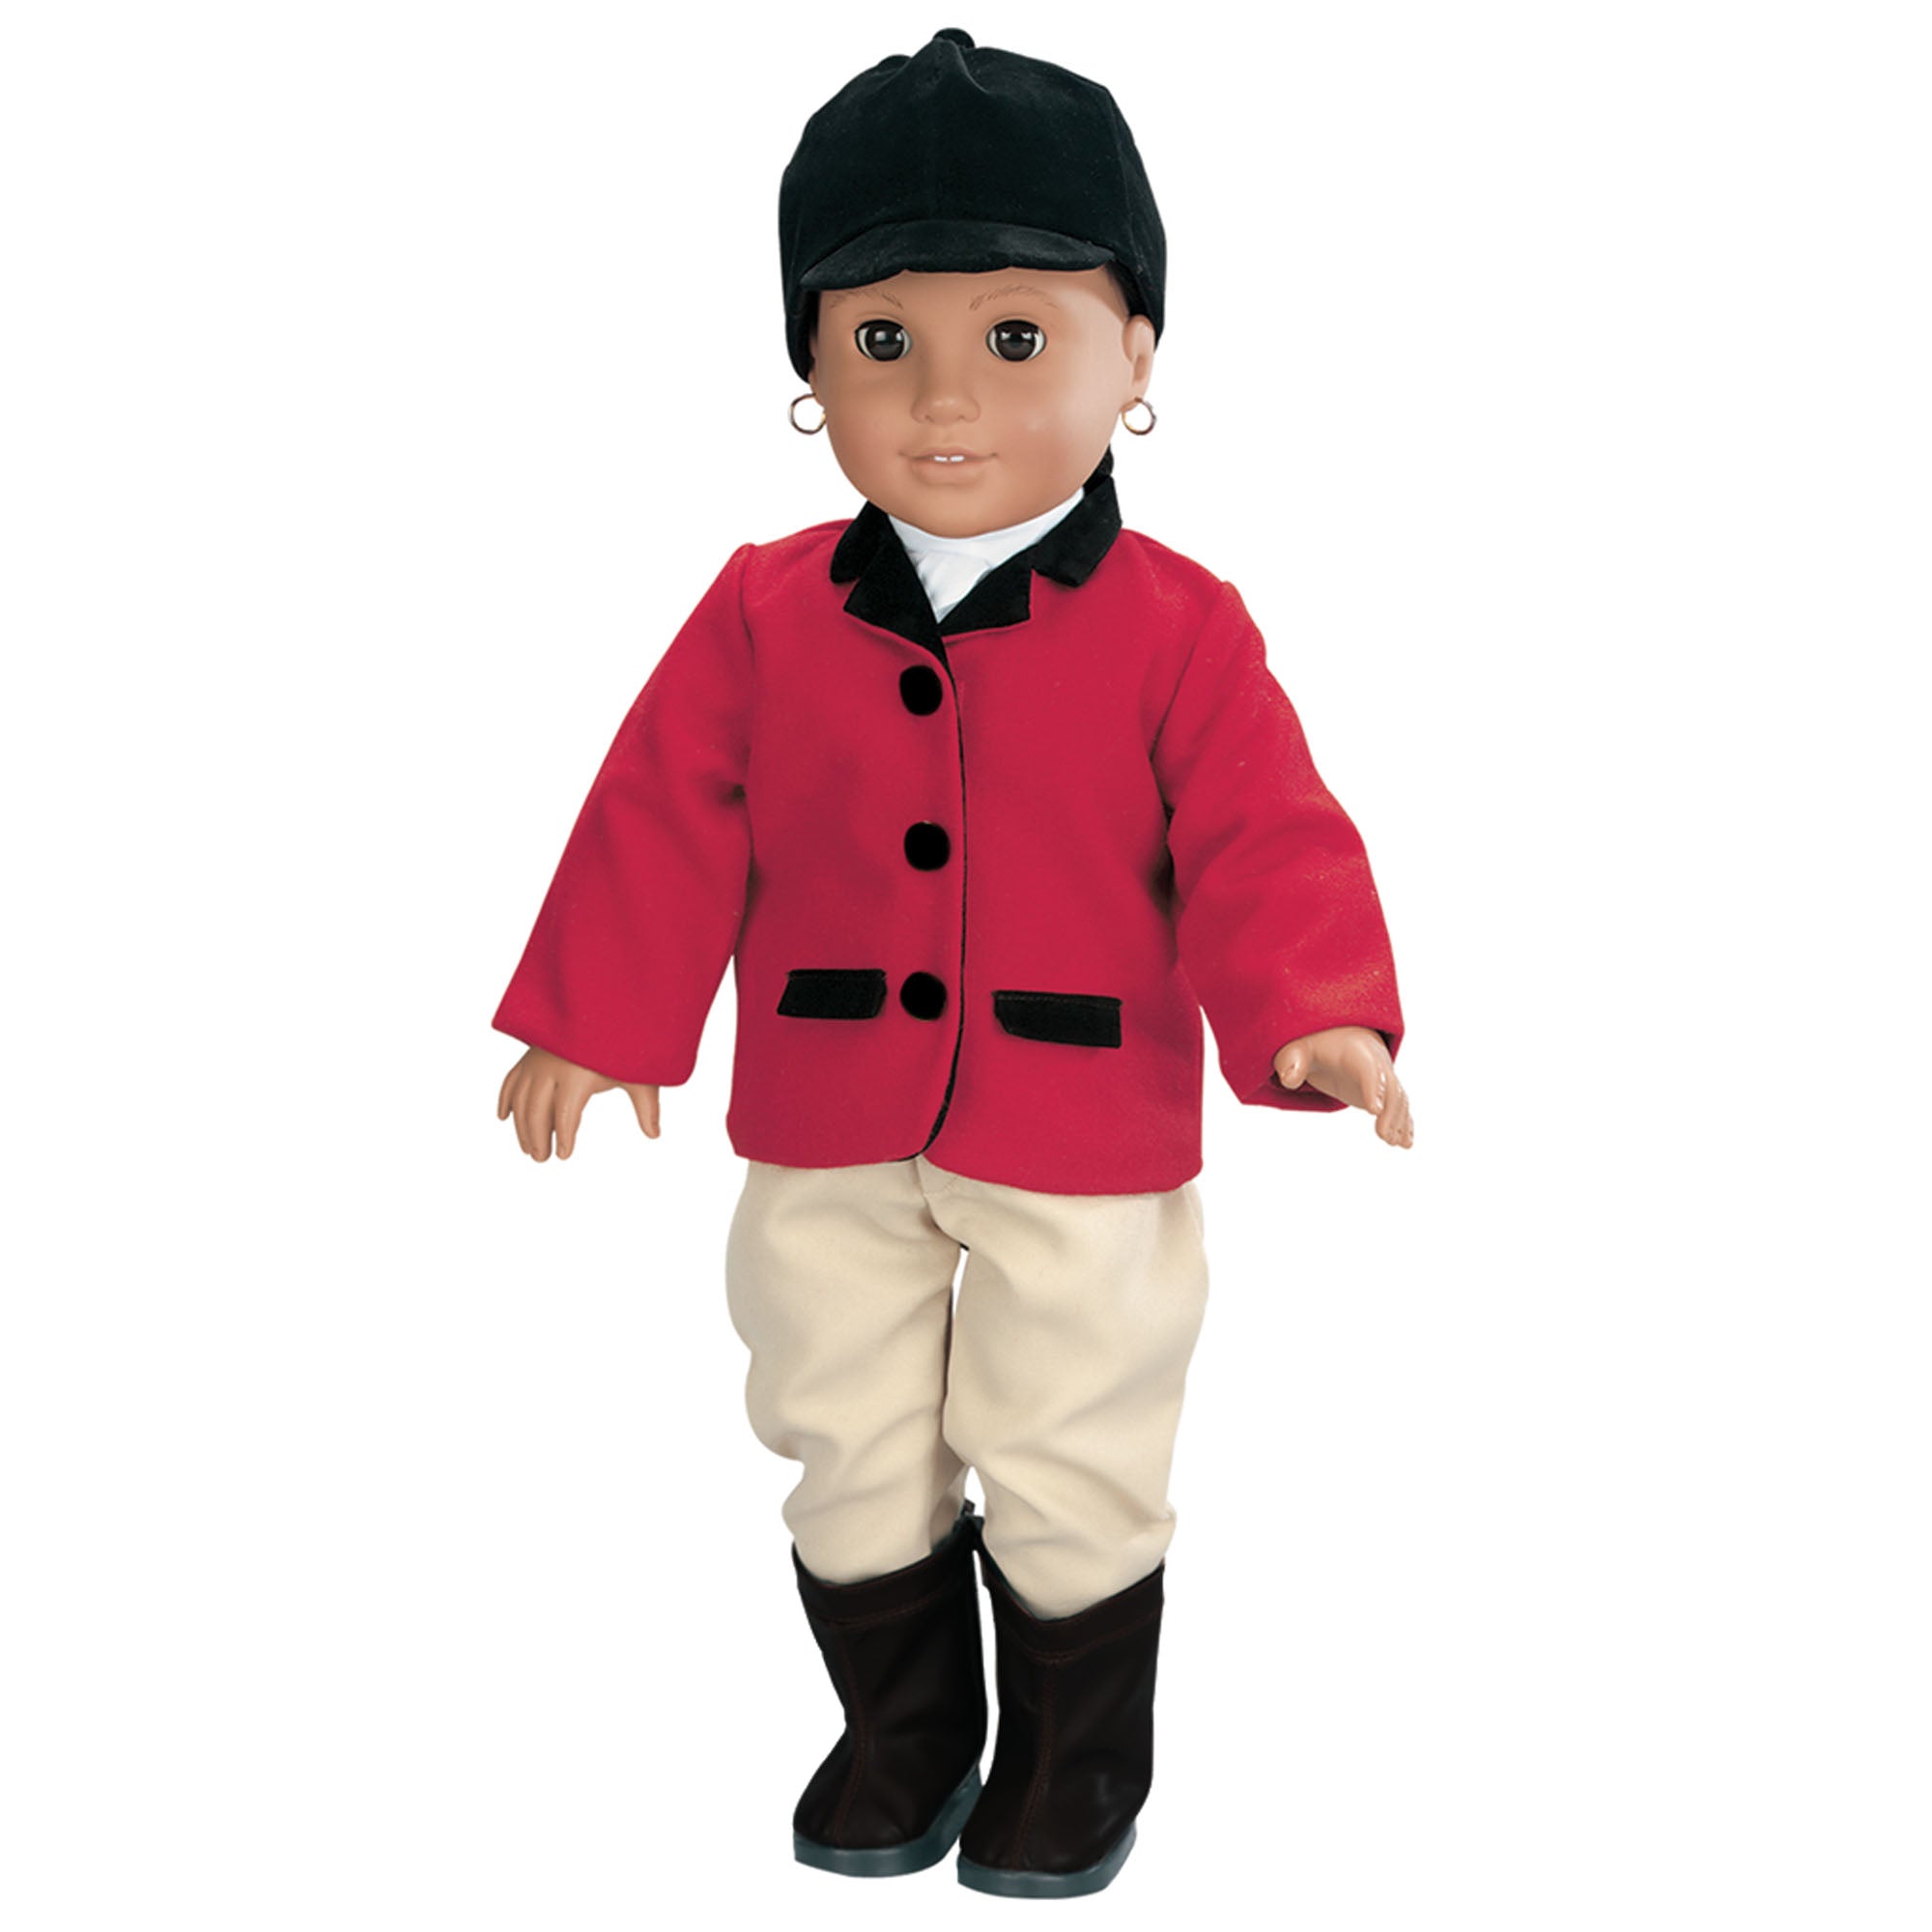 Sophia's - 18" Doll - Red Riding Outfit & Black Boots